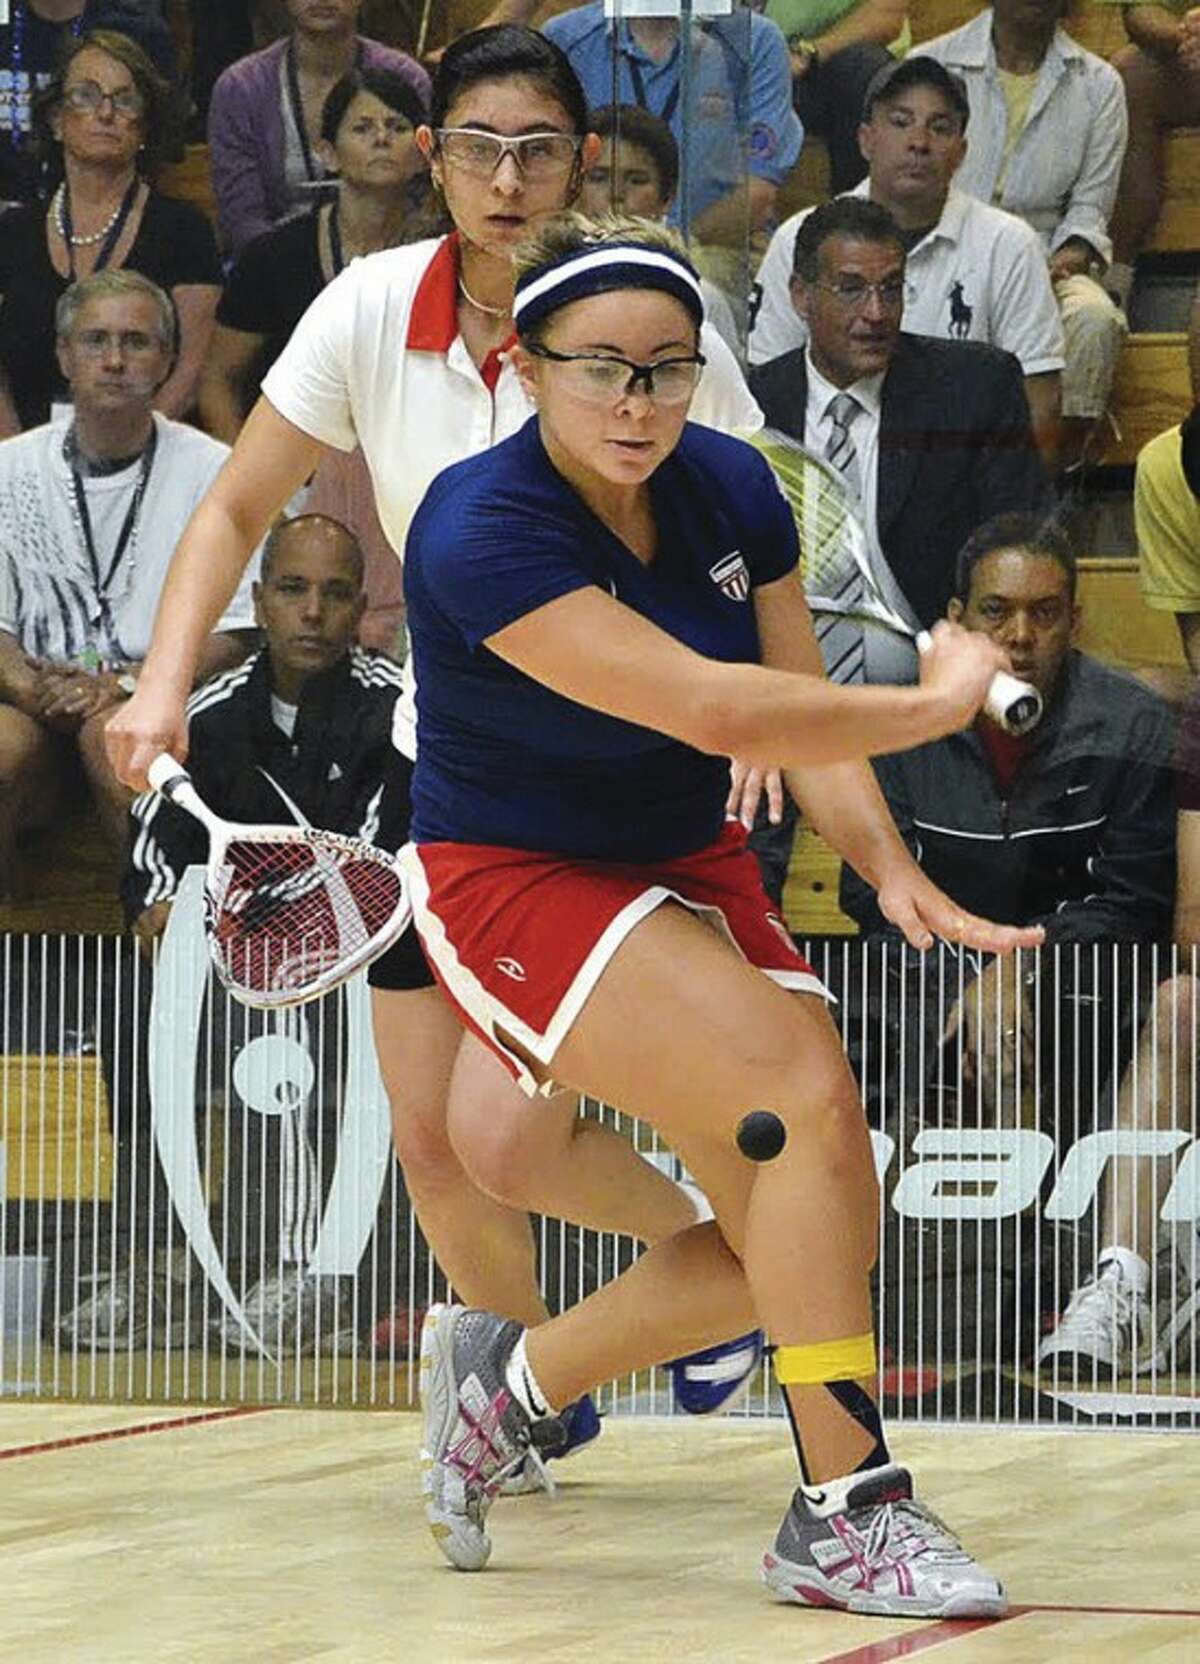 @White=[C] Photo by Steve Cubbins/Courtesy of squash.uk.co Olivia Blatchford, right, of Wilton goes up against her Egyptian opponent during the World Junior Squash Championships in Boston last month. Blatchford helped lead her team to a second-place finish, its best-ever showing, before turning pro.